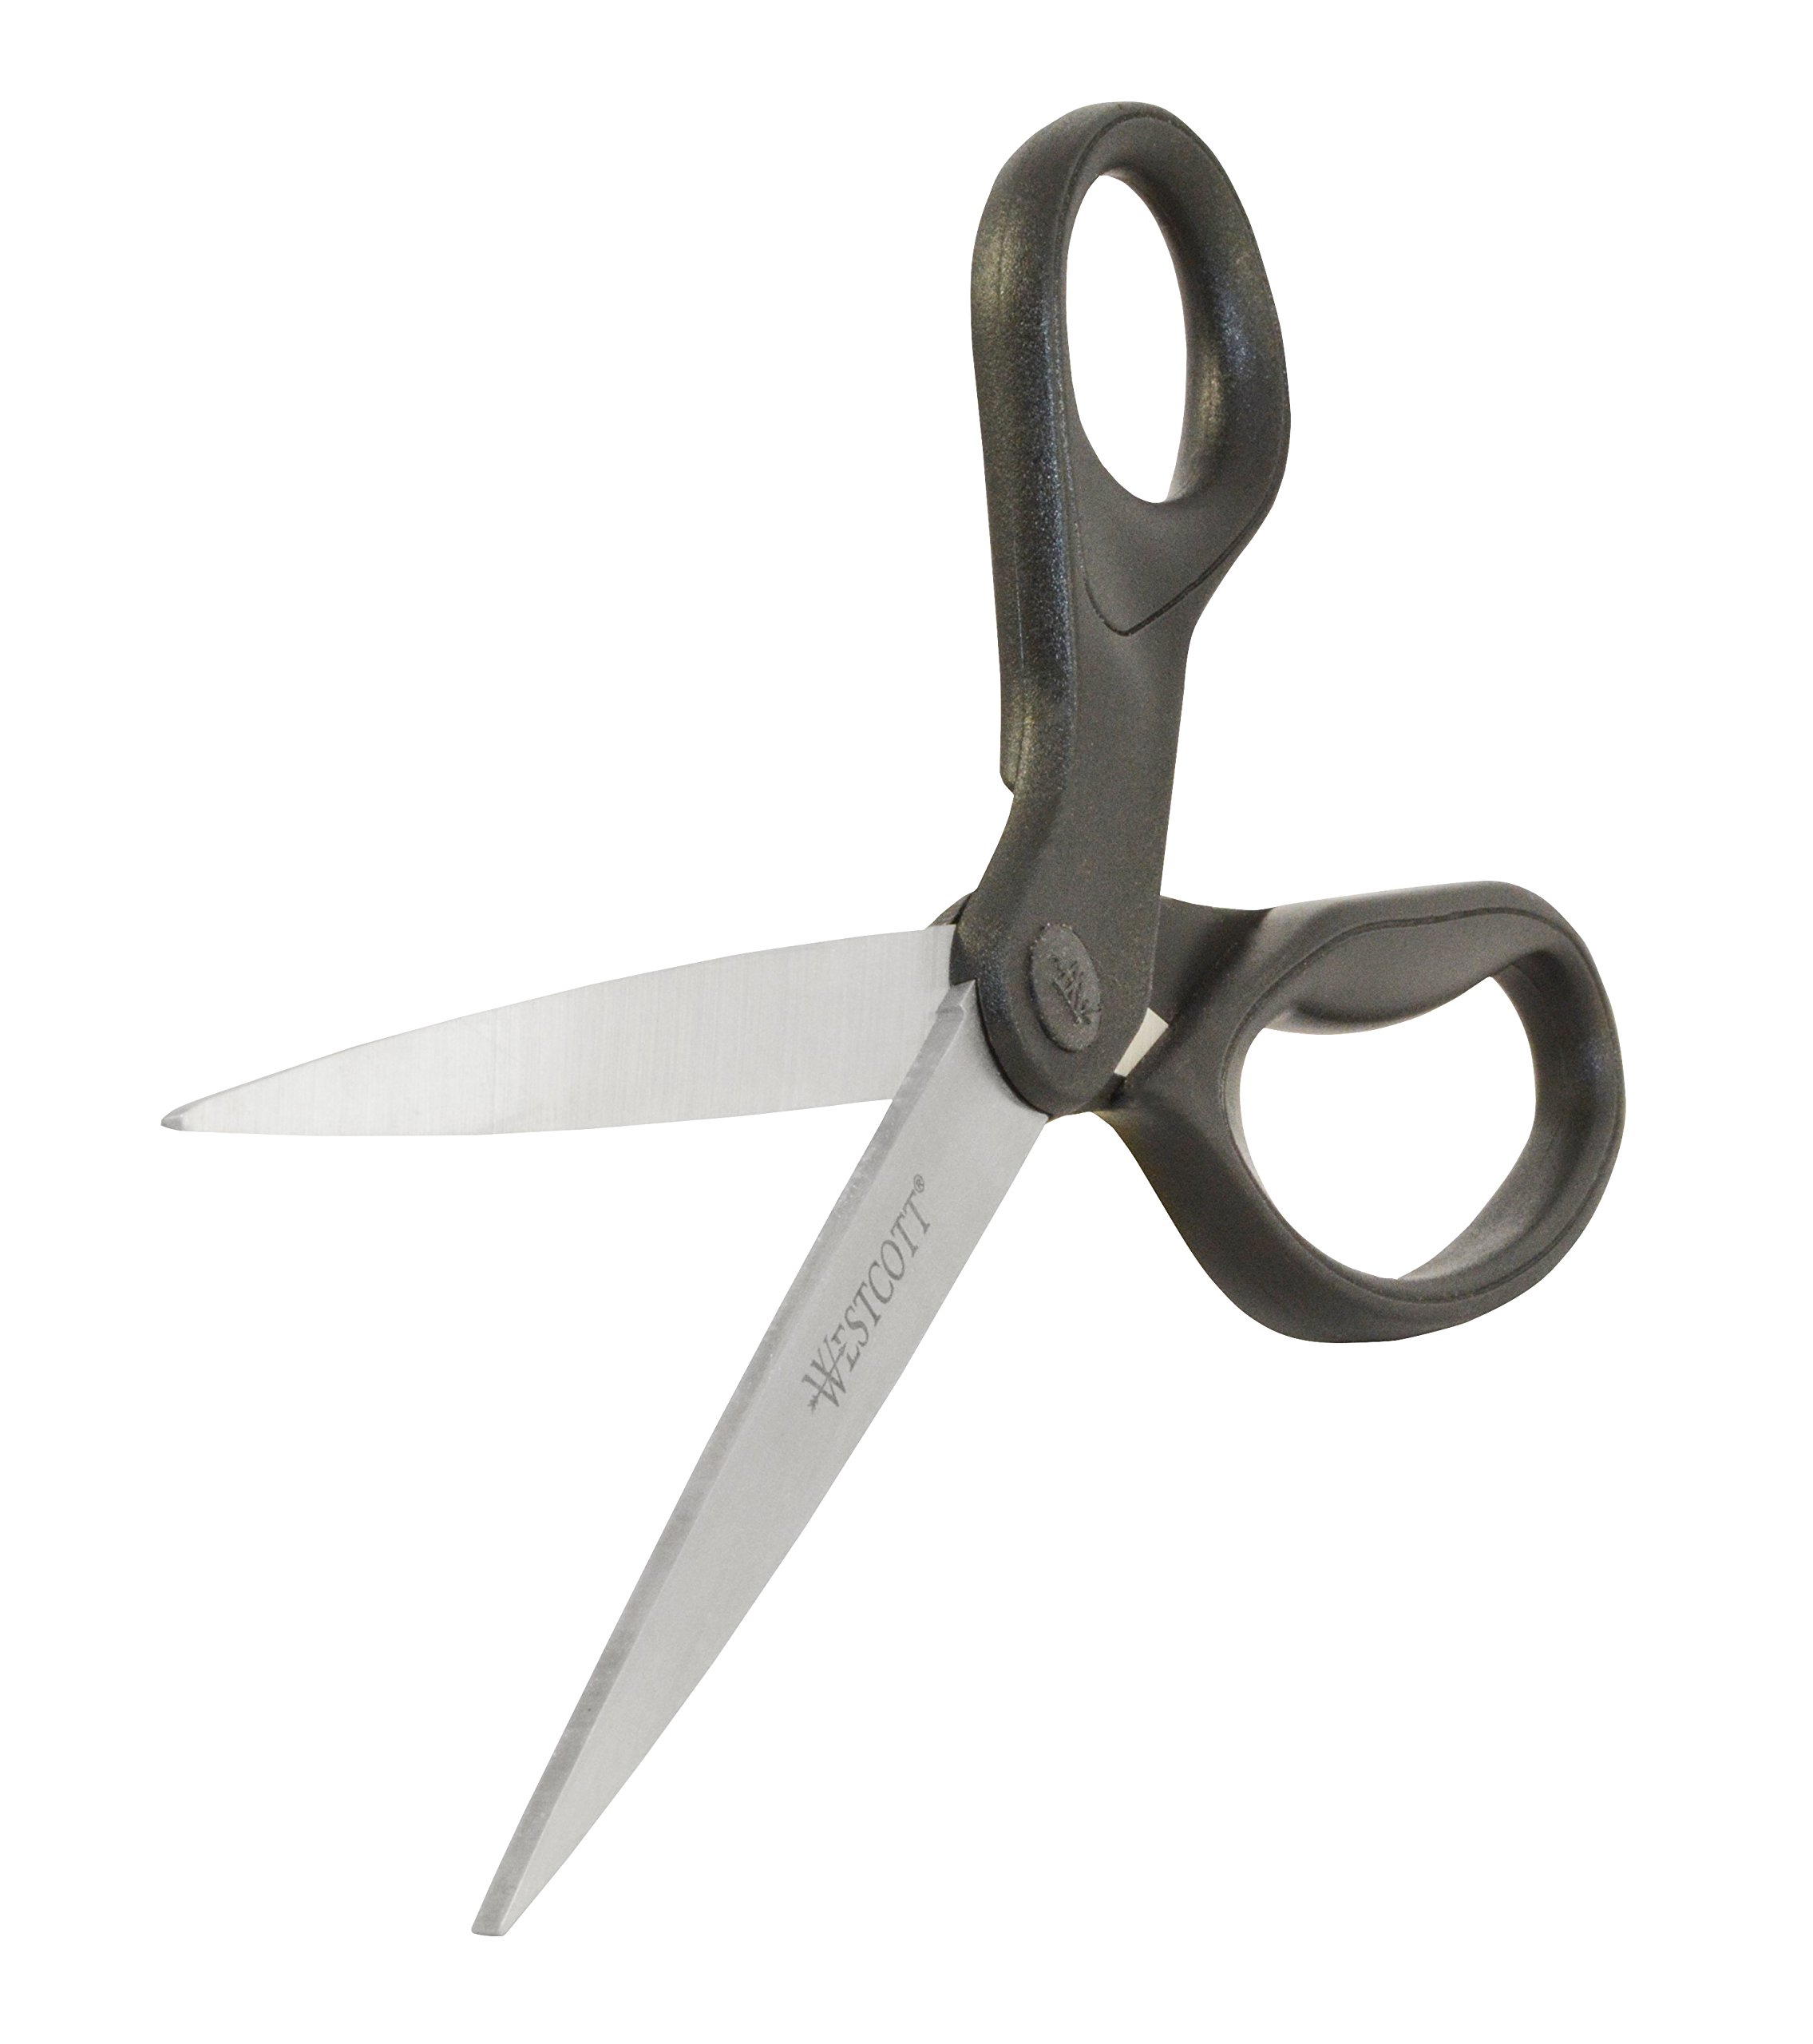 Westcott 16451 8-Inch KleenEarth Recycled Scissors for Office and Home, Black